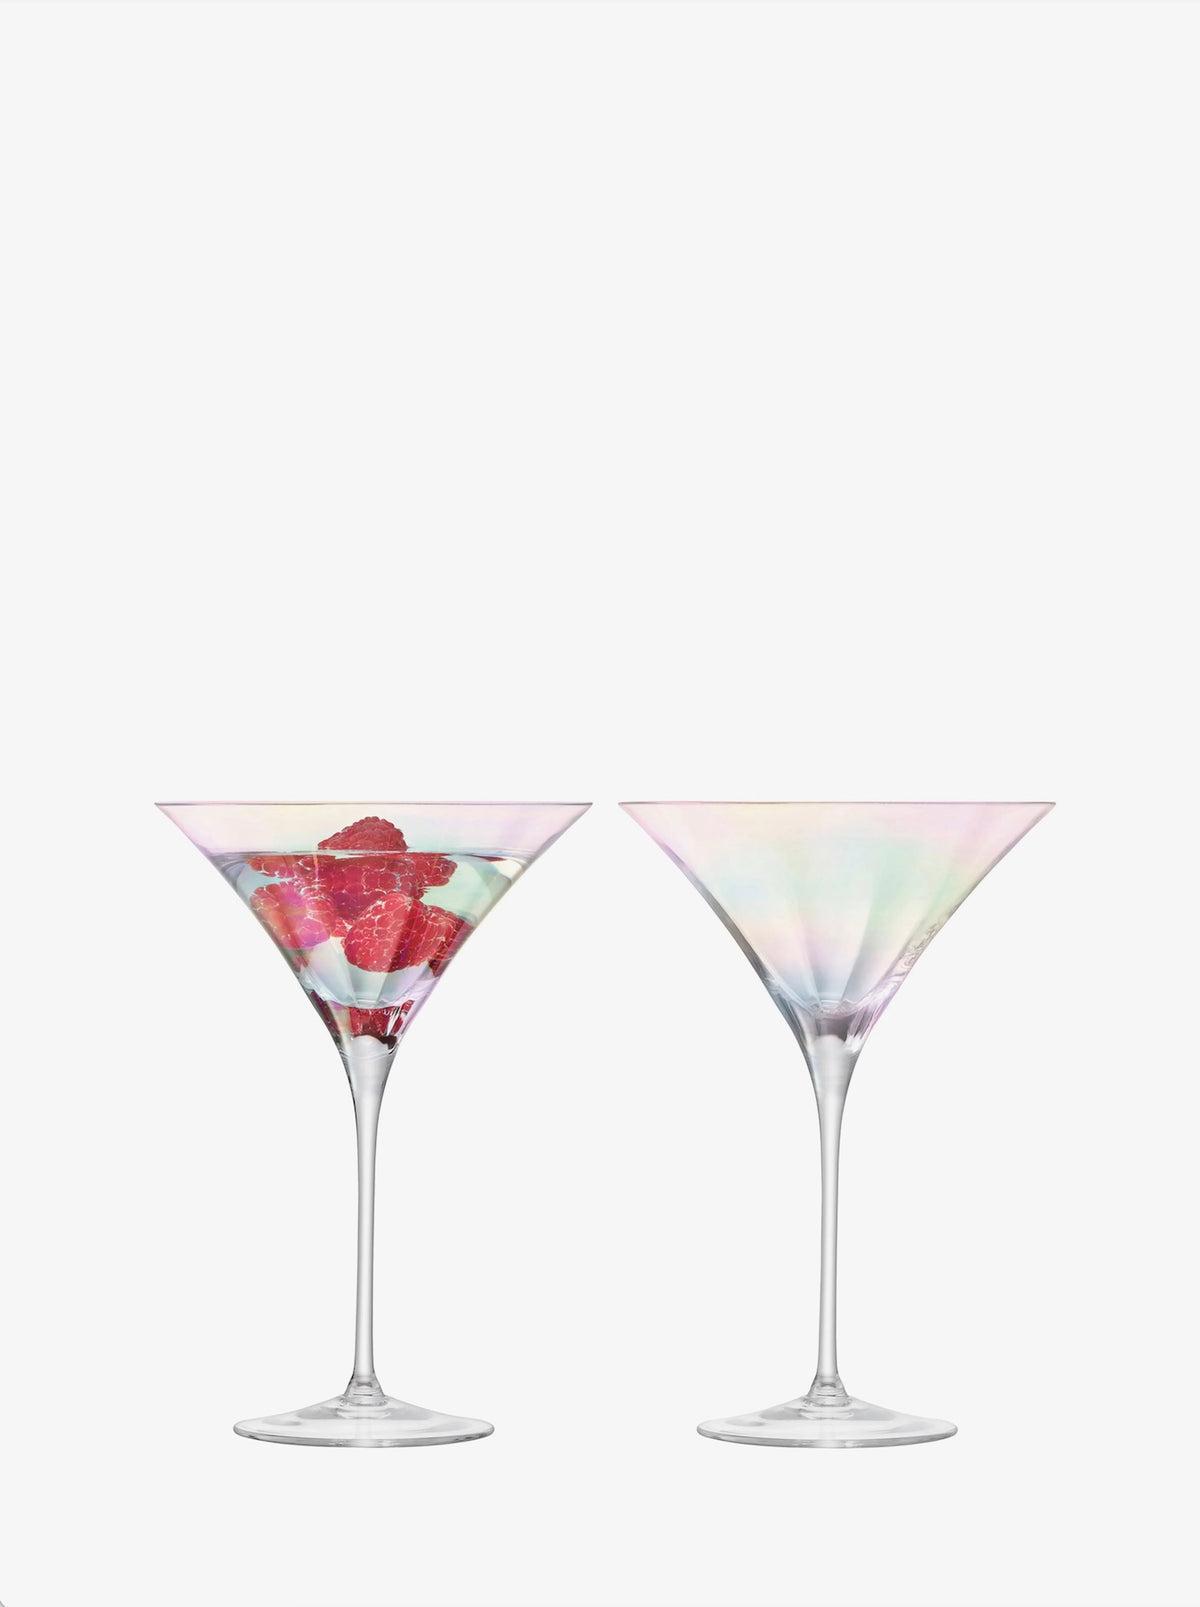 Pearl Cocktail Glass x 2 300ml